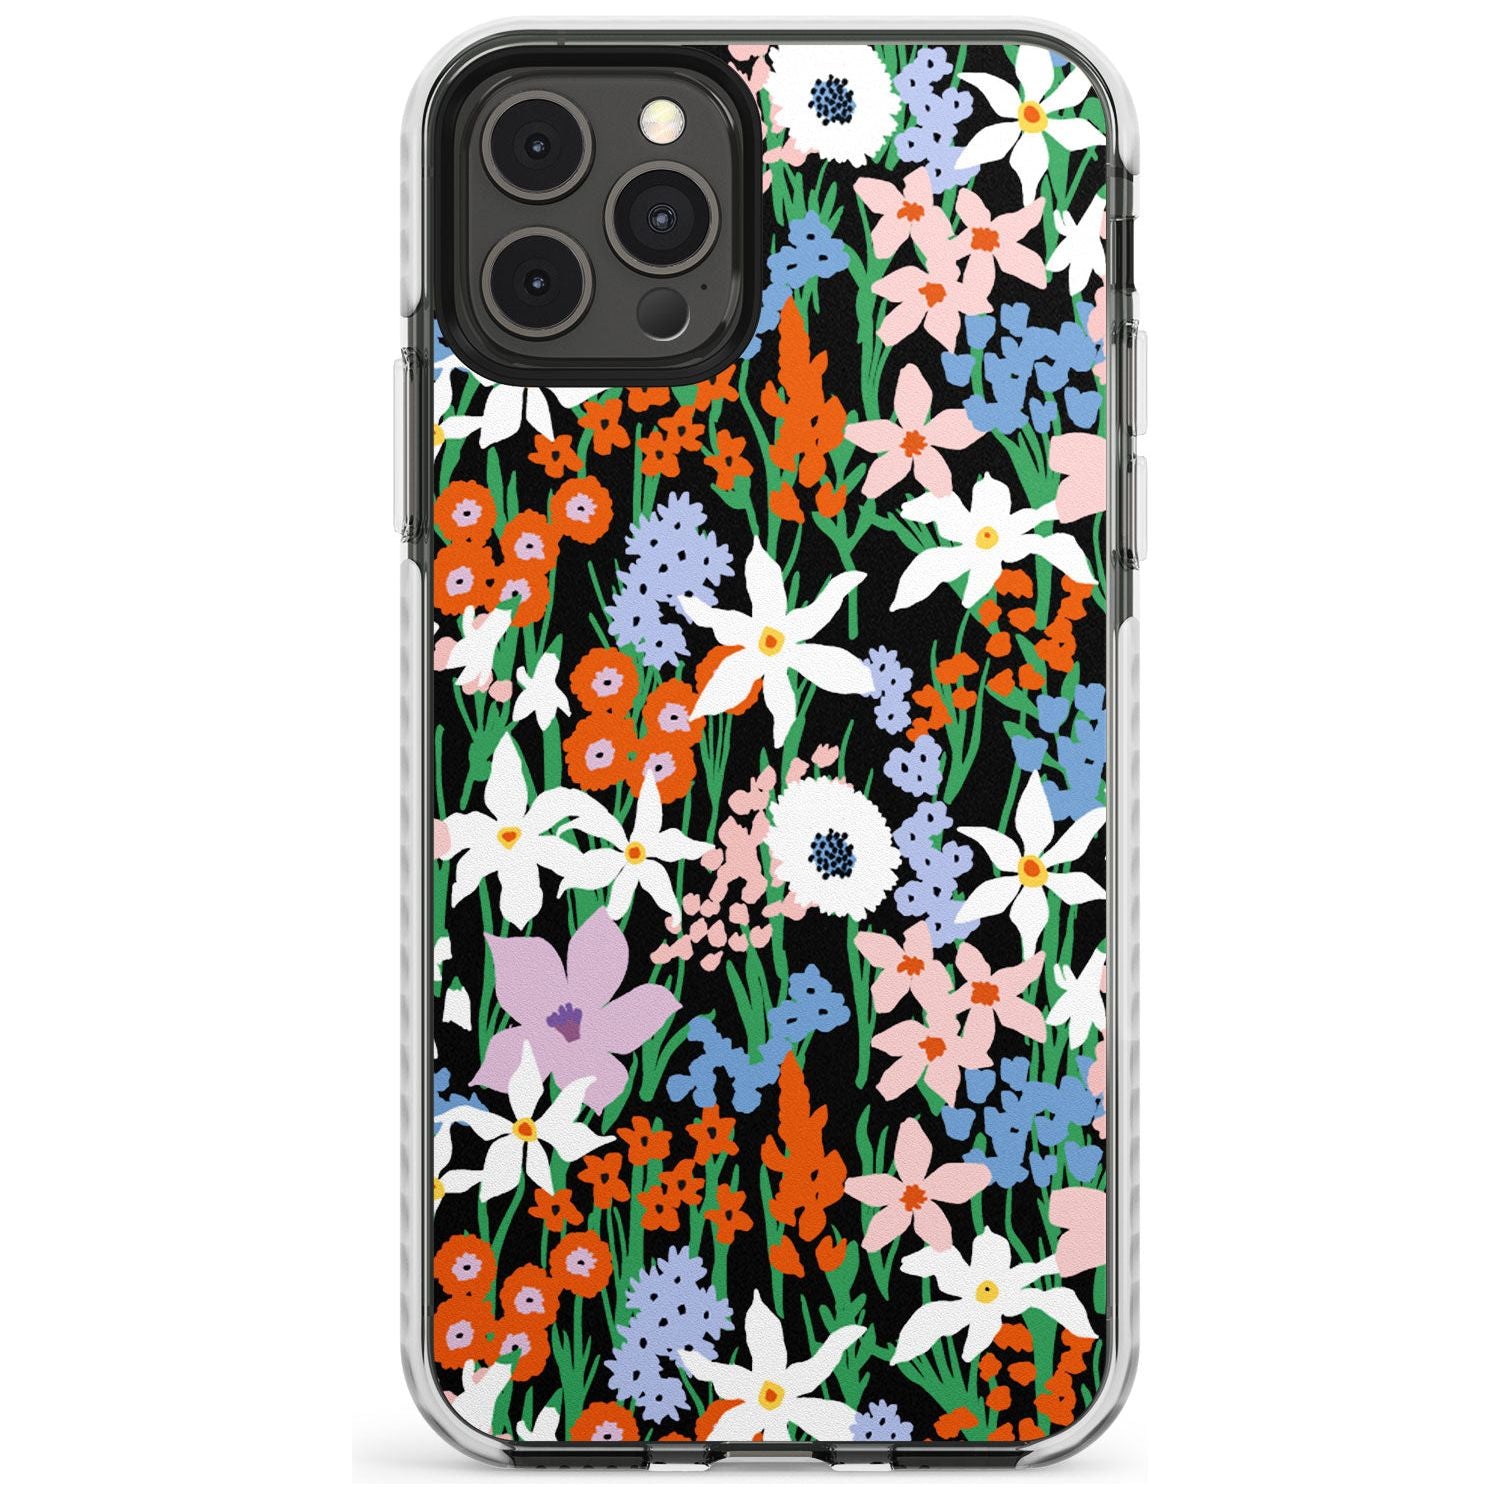 Springtime Meadow: Solid Slim TPU Phone Case for iPhone 11 Pro Max